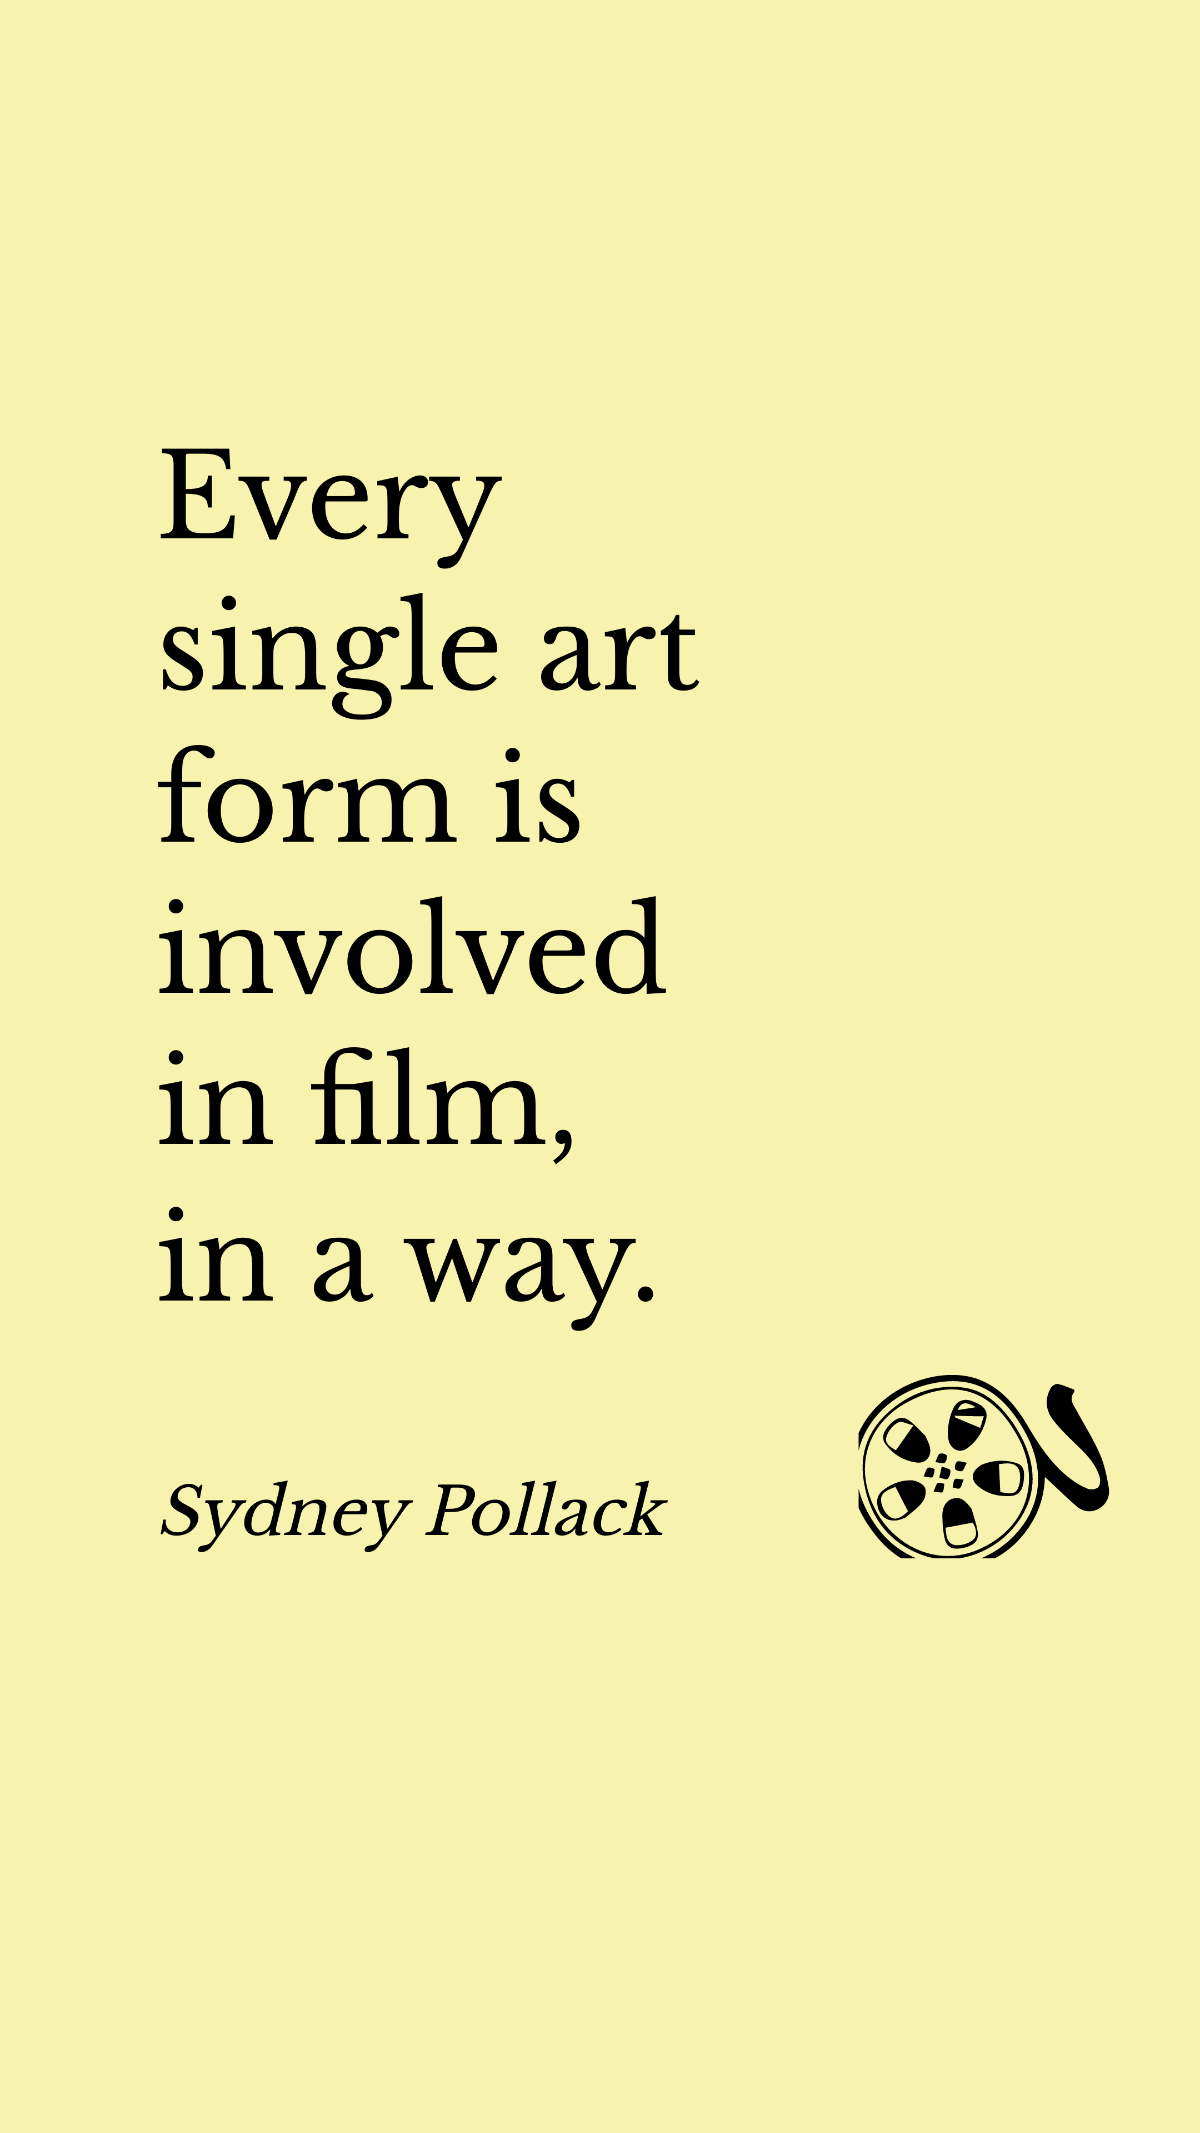 Sydney Pollack - Every single art form is involved in film, in a way. Template